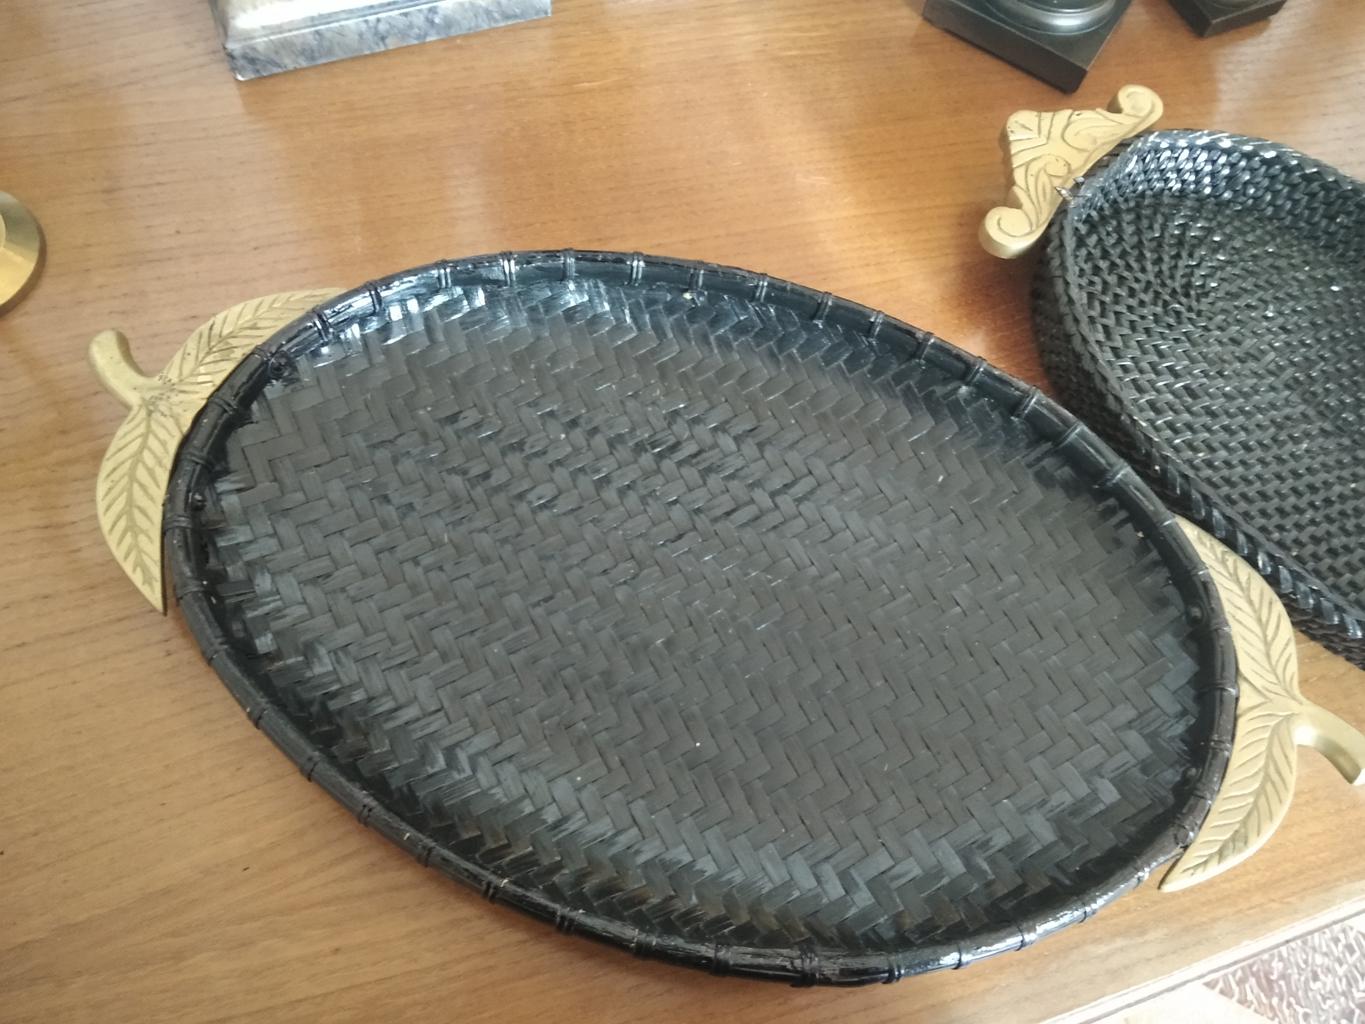 Trays Black Rattan and Brass Handles Oriental Origin 3 Pieces, Mid 20th Century For Sale 1